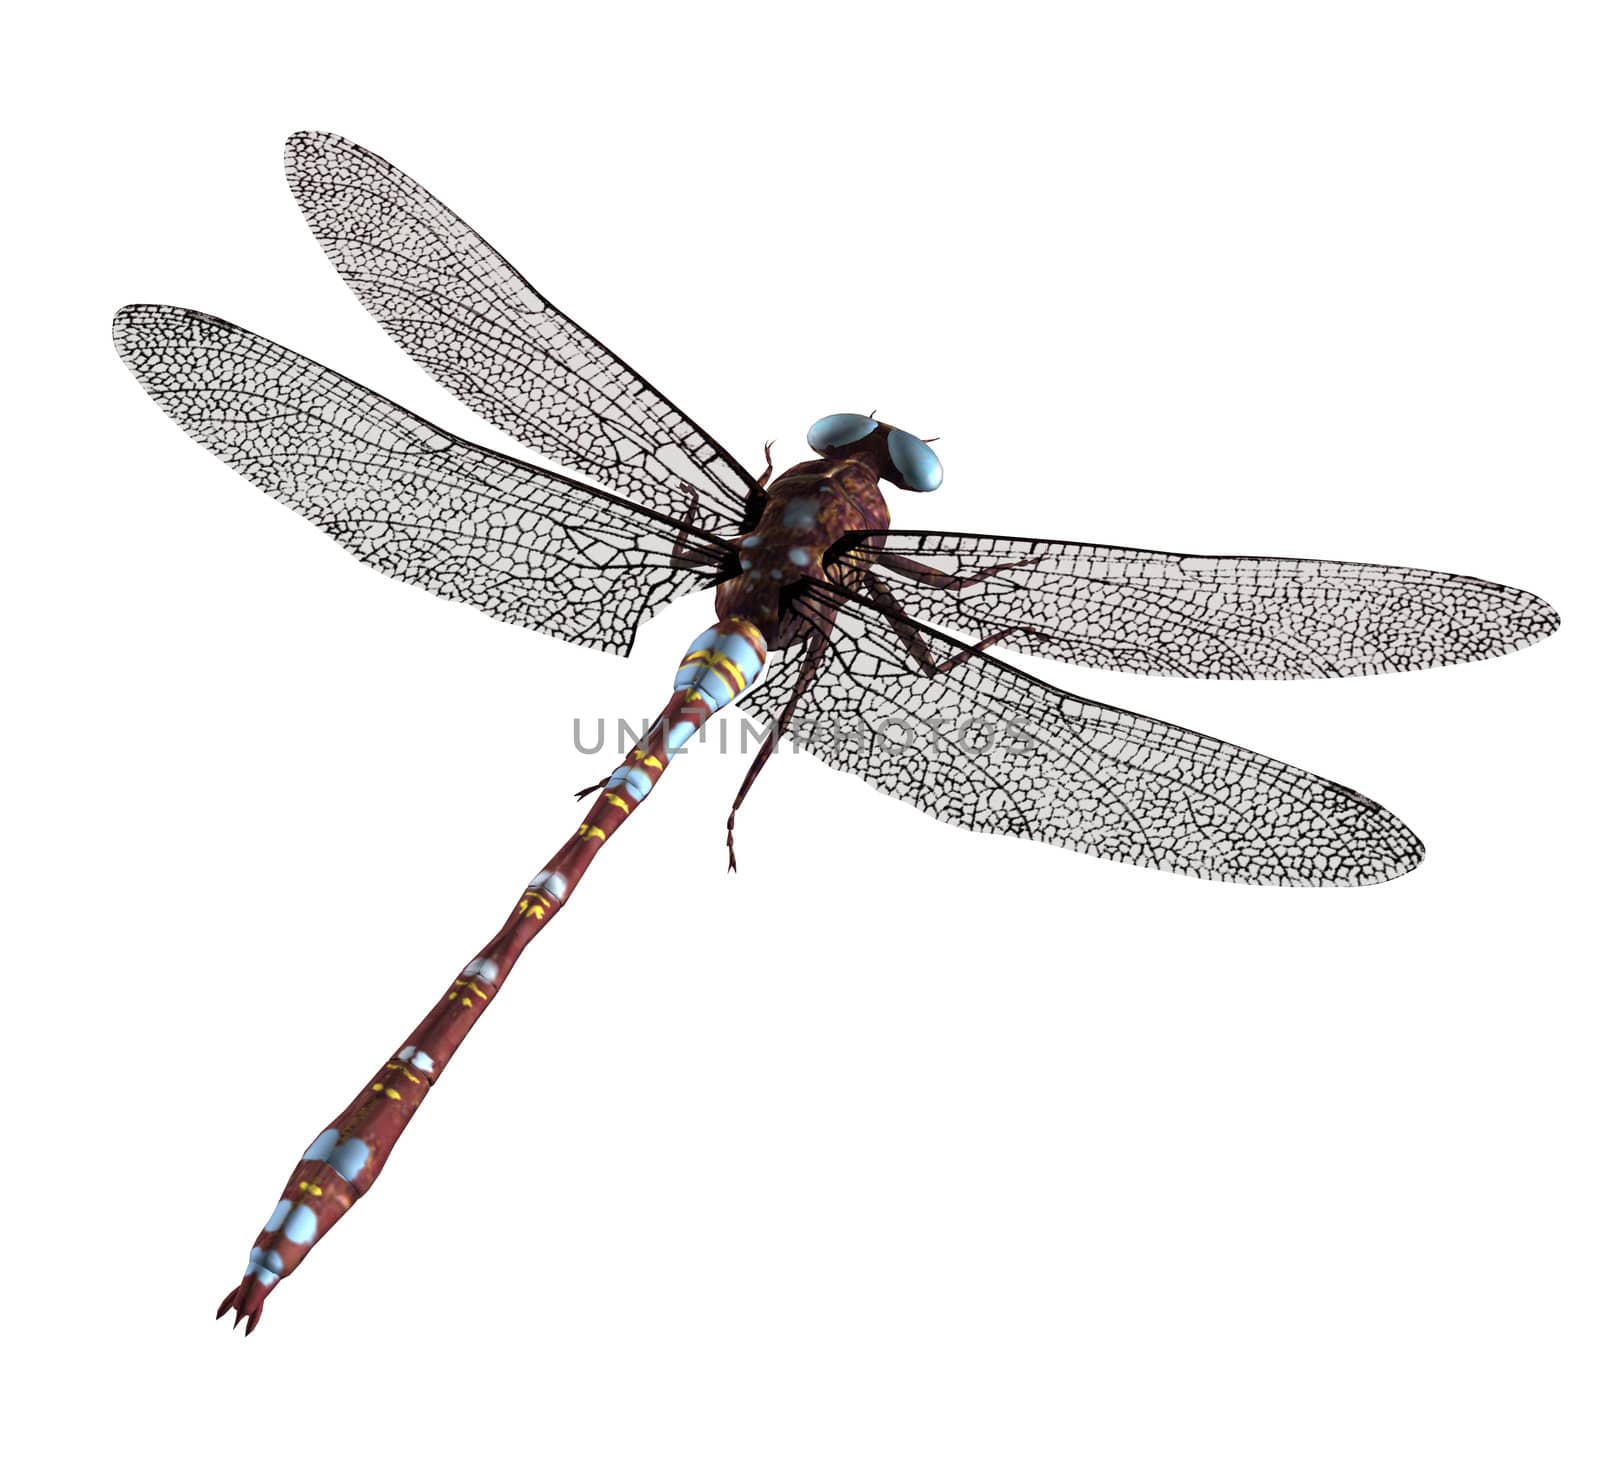 A brown blue dragonfly with blue eyes and wings spread